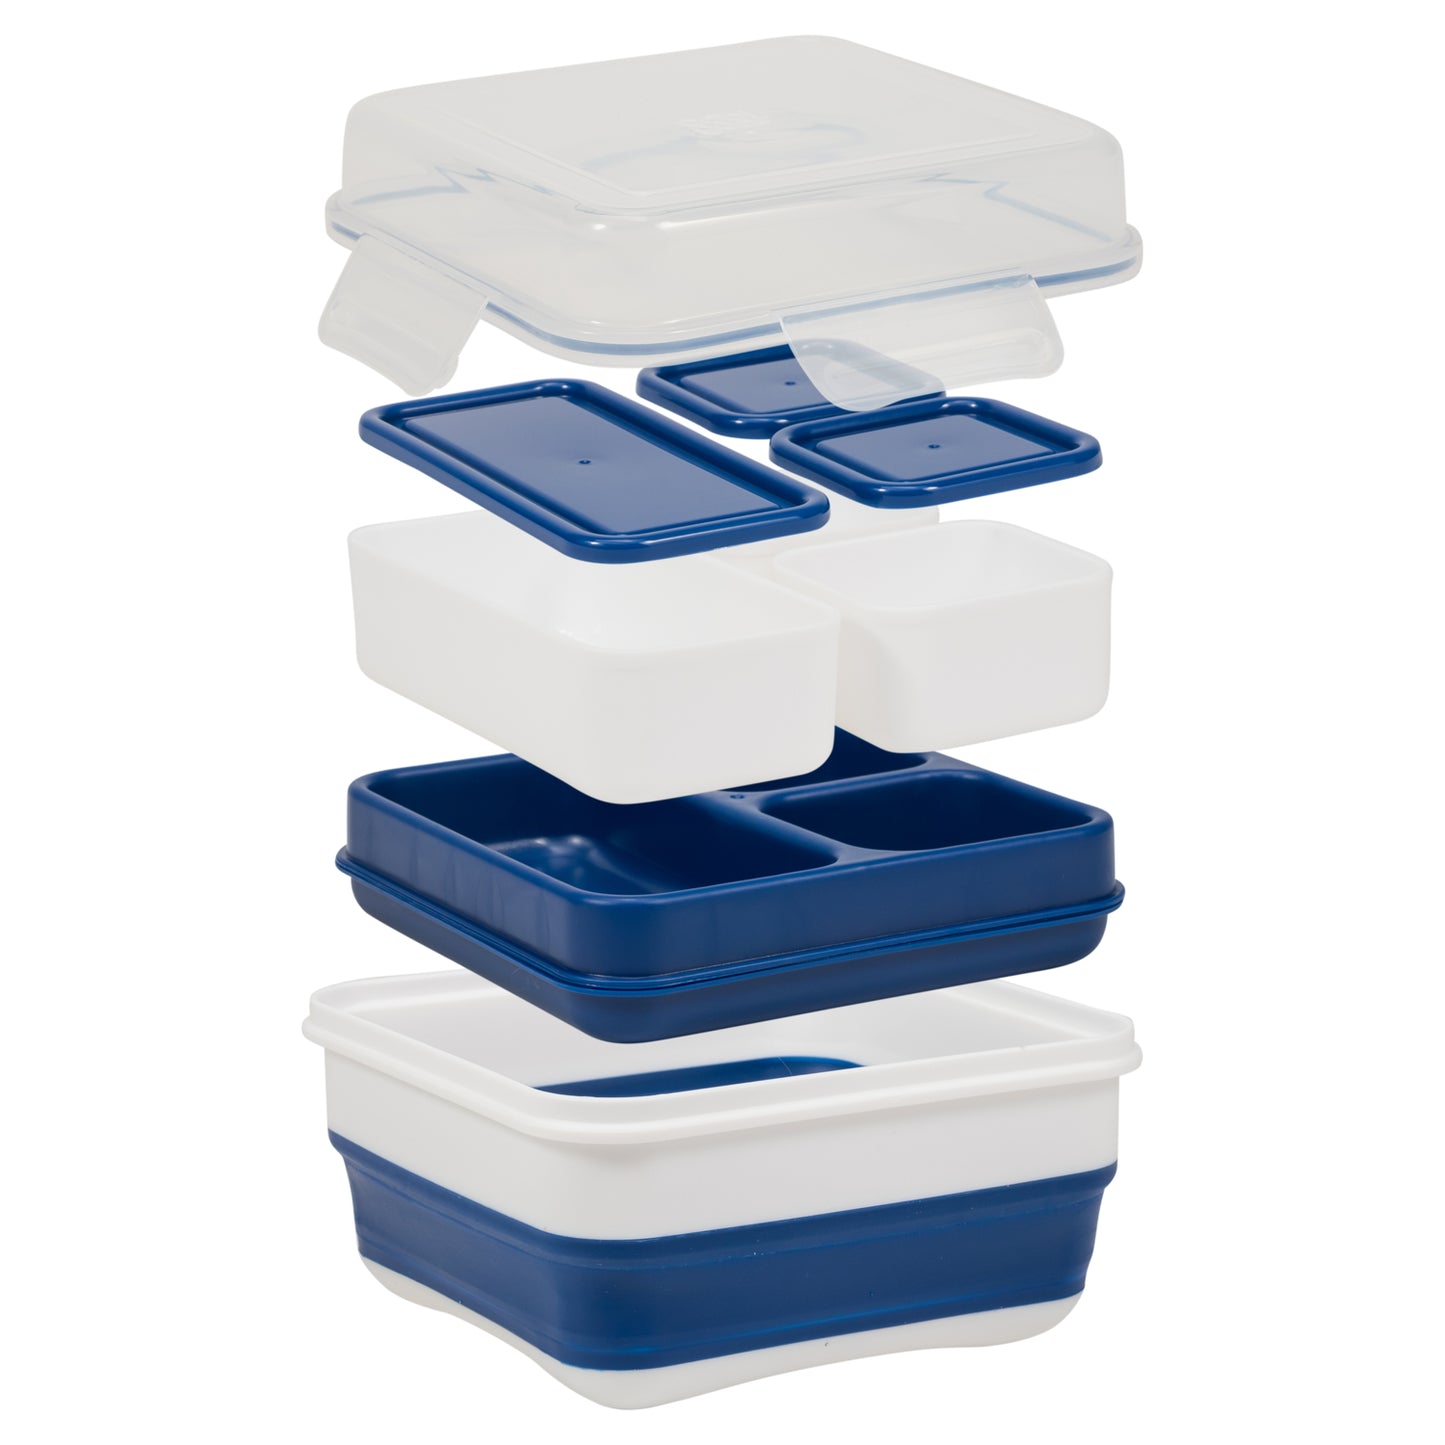 COOL GEAR 3-Pack Expandable Bento Containers | Great For Salad, Lunch, Snacks, Travel, and More | Dishwasher & Microwave Safe | 4 Compartments With Lids